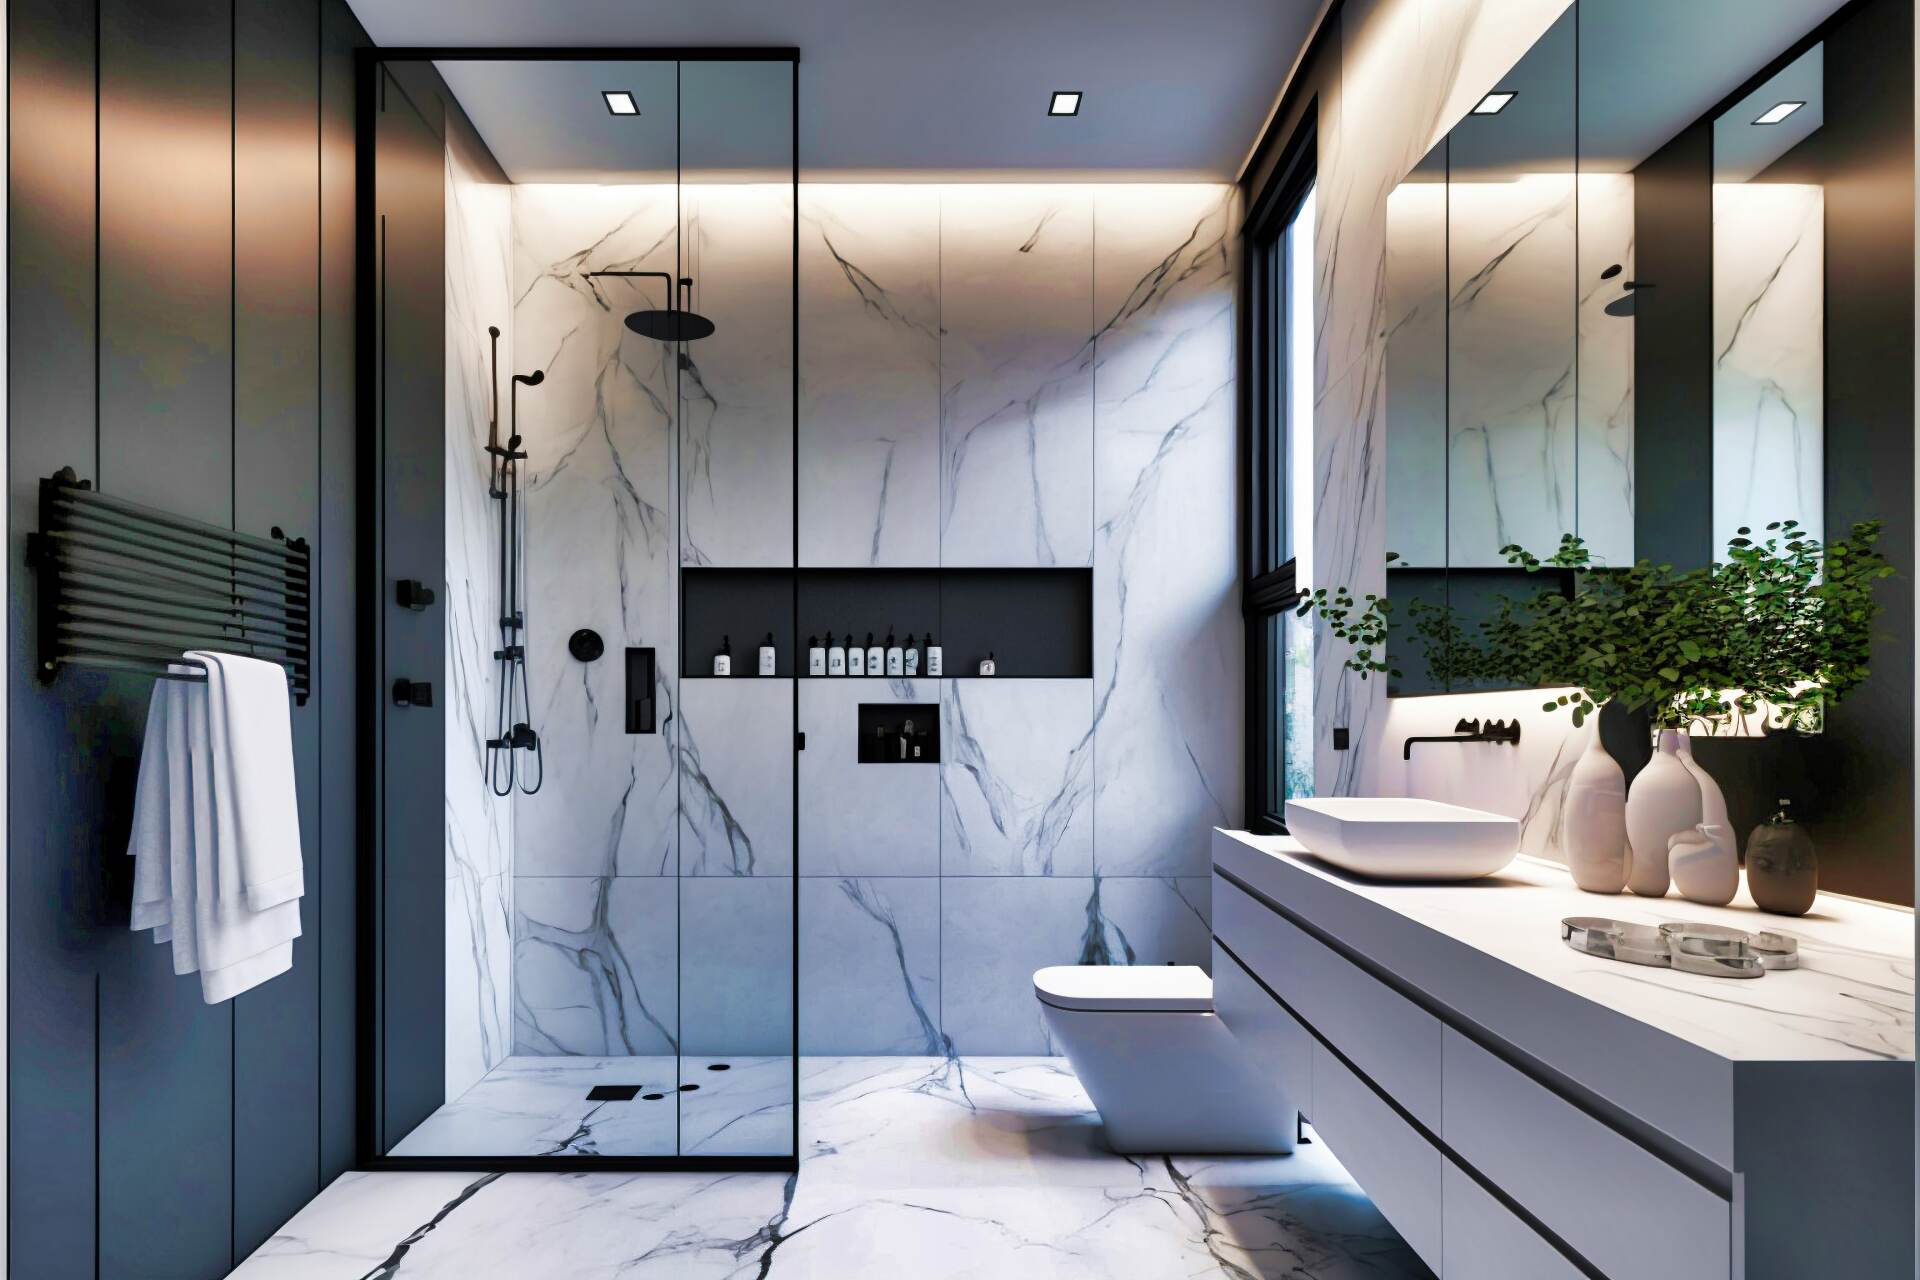 A Modern Bathroom With A Monochromatic Aesthetic. The Space Features A Floating Vanity With A White Sink And A Large Mirror. The Shower Has A Glass Partition And A Rainfall Showerhead. The Floors And Walls Are White Marble, With A Mix Of Black Accents And Fixtures. The Room Is Illuminated By Recessed Lighting.